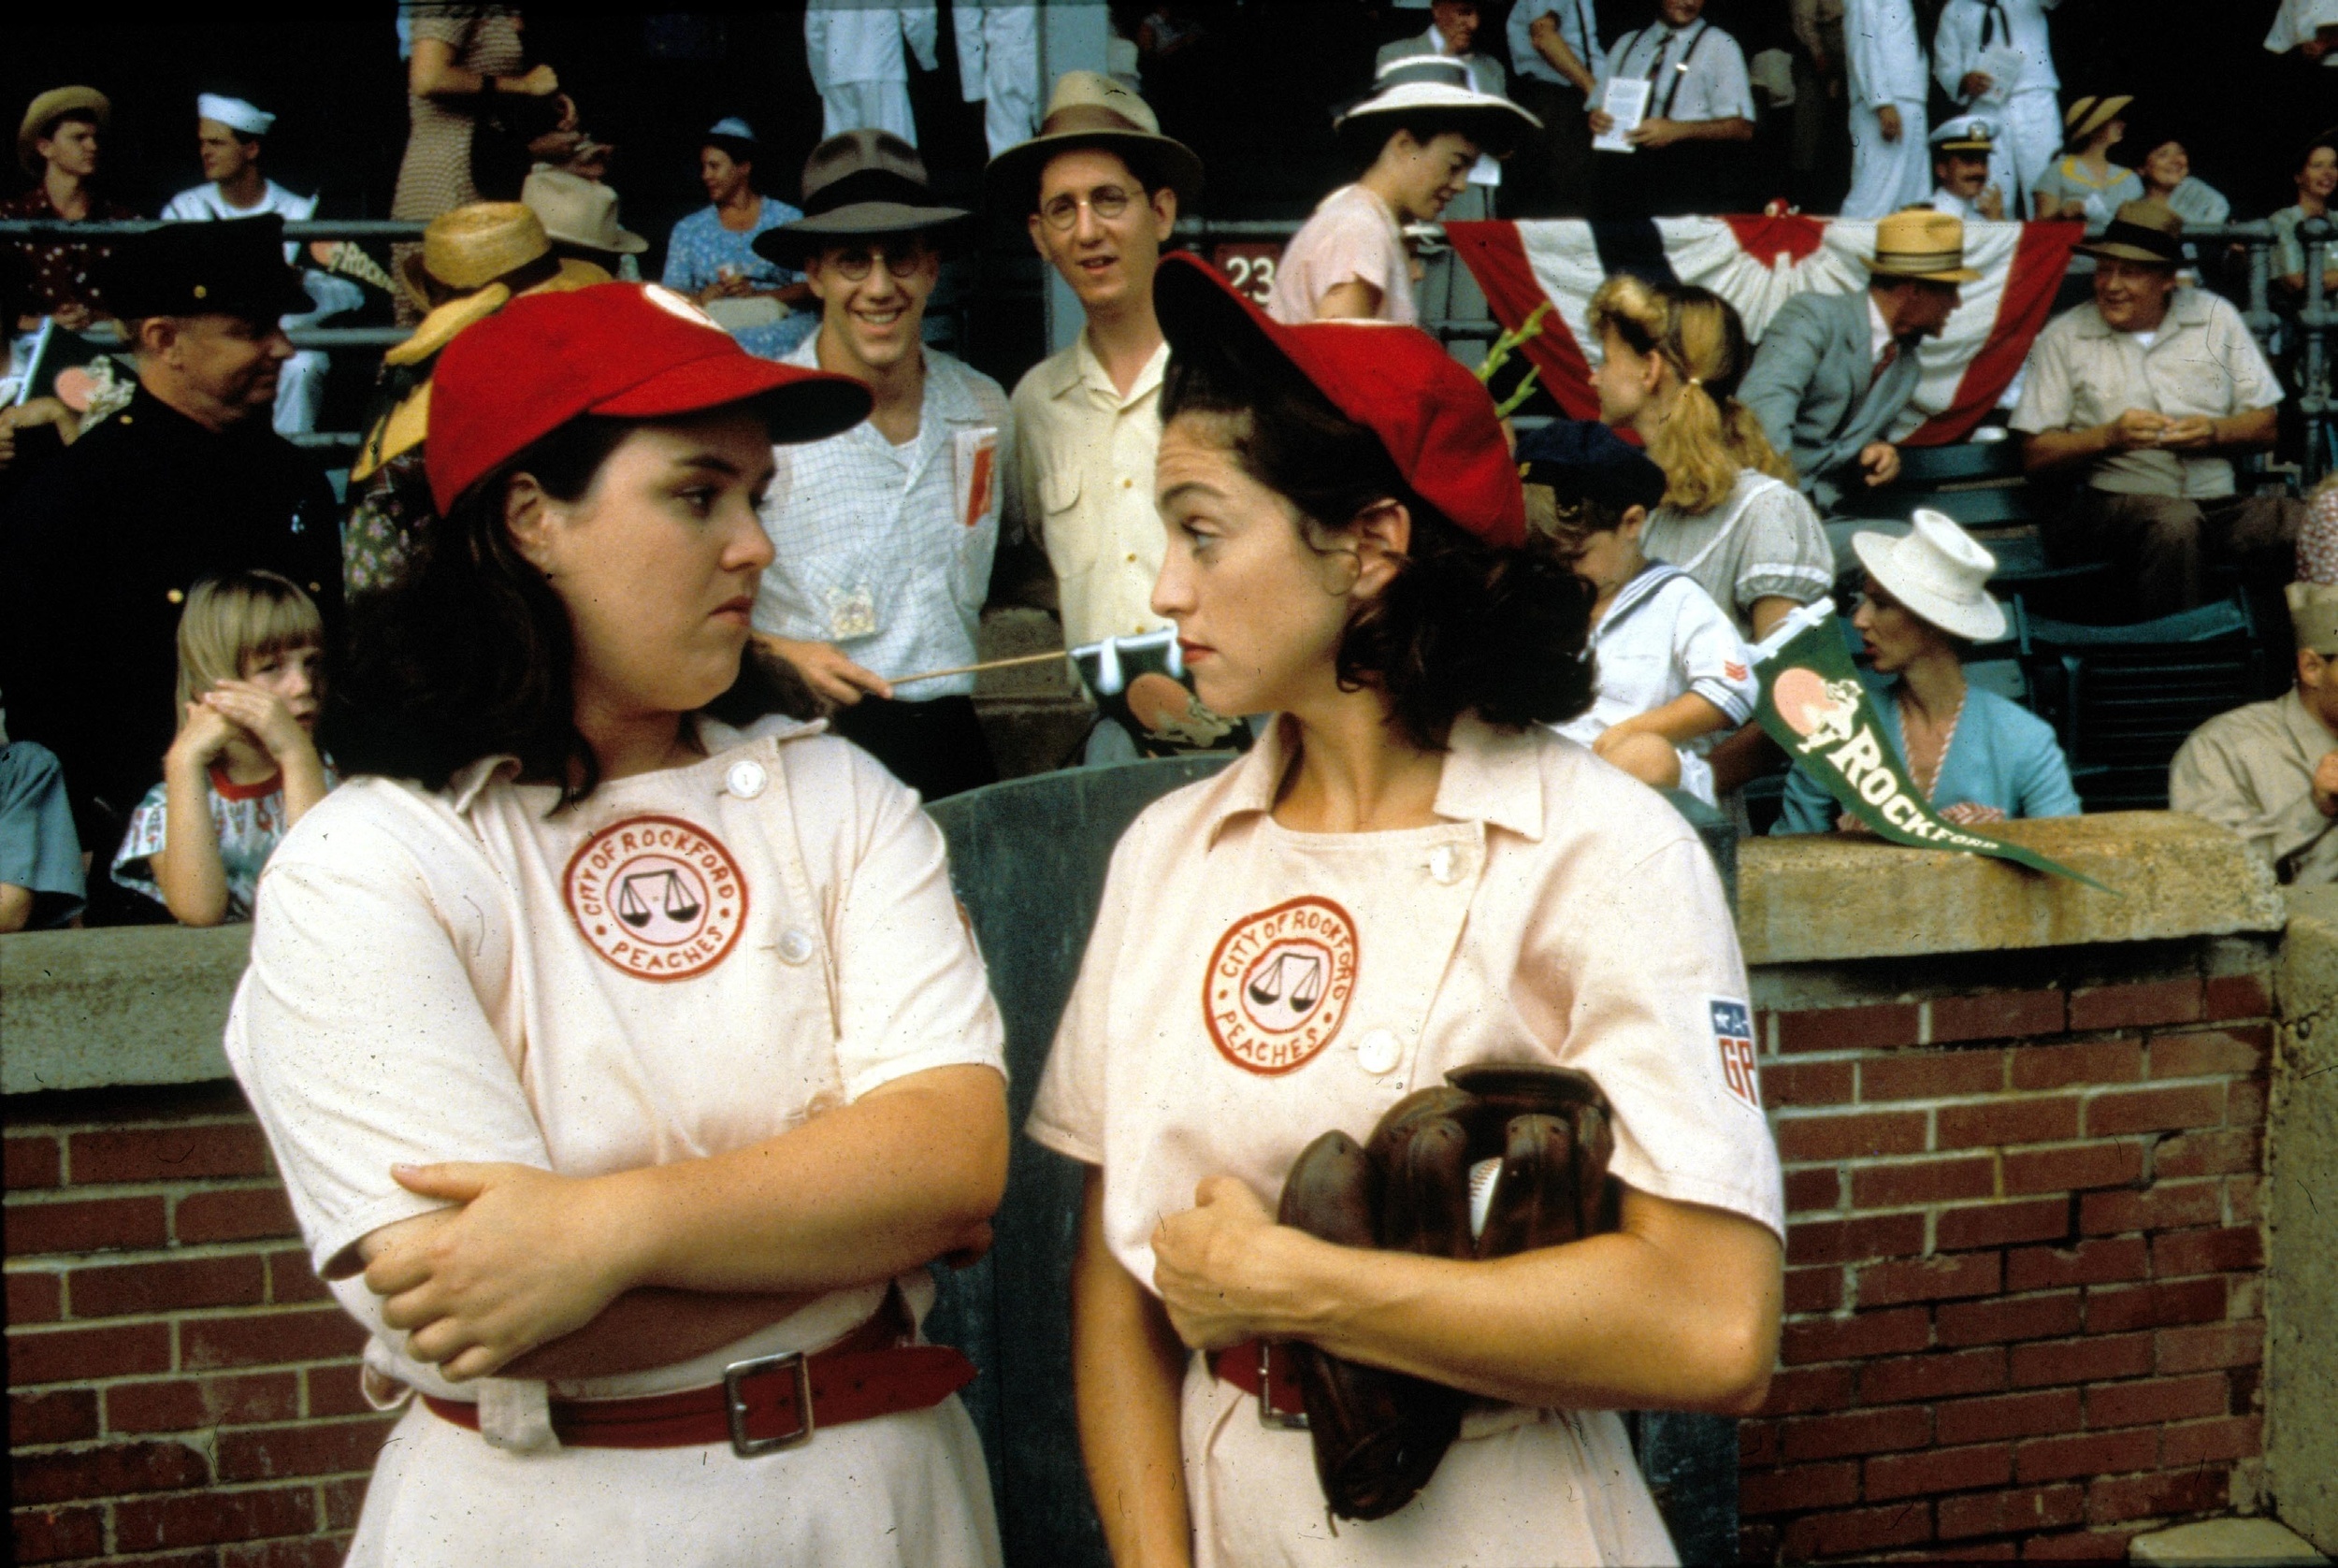 <p>Though dramatized, <em>A League of Their Own</em> is inspired by the real-life All-American Girls Professional Baseball League. The film has been part of pop culture for so long that it’s just heralded as a great movie rather than remembered for what it’s based on. </p><p>You may also like: <a href='https://www.yardbarker.com/entertainment/articles/the_20_movies_that_made_walt_disney_pictures_040624/s1__39818872'>The 20 movies that made Walt Disney Pictures</a></p>